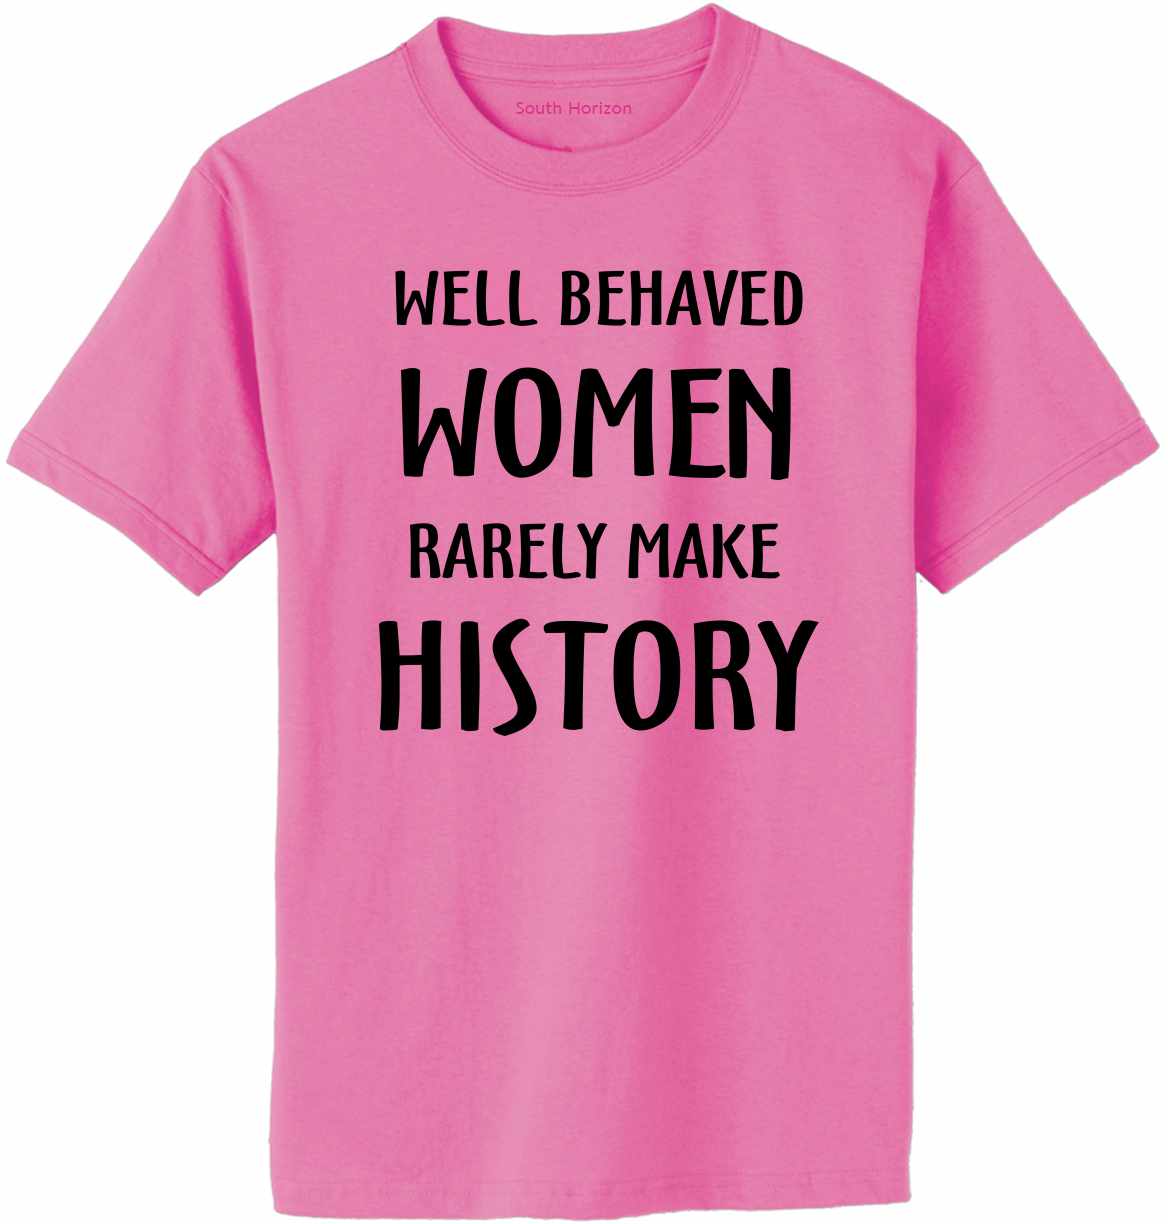 WELL BEHAVED WOMEN RARELY MAKE HISTORY Adult T-Shirt (#332-1)